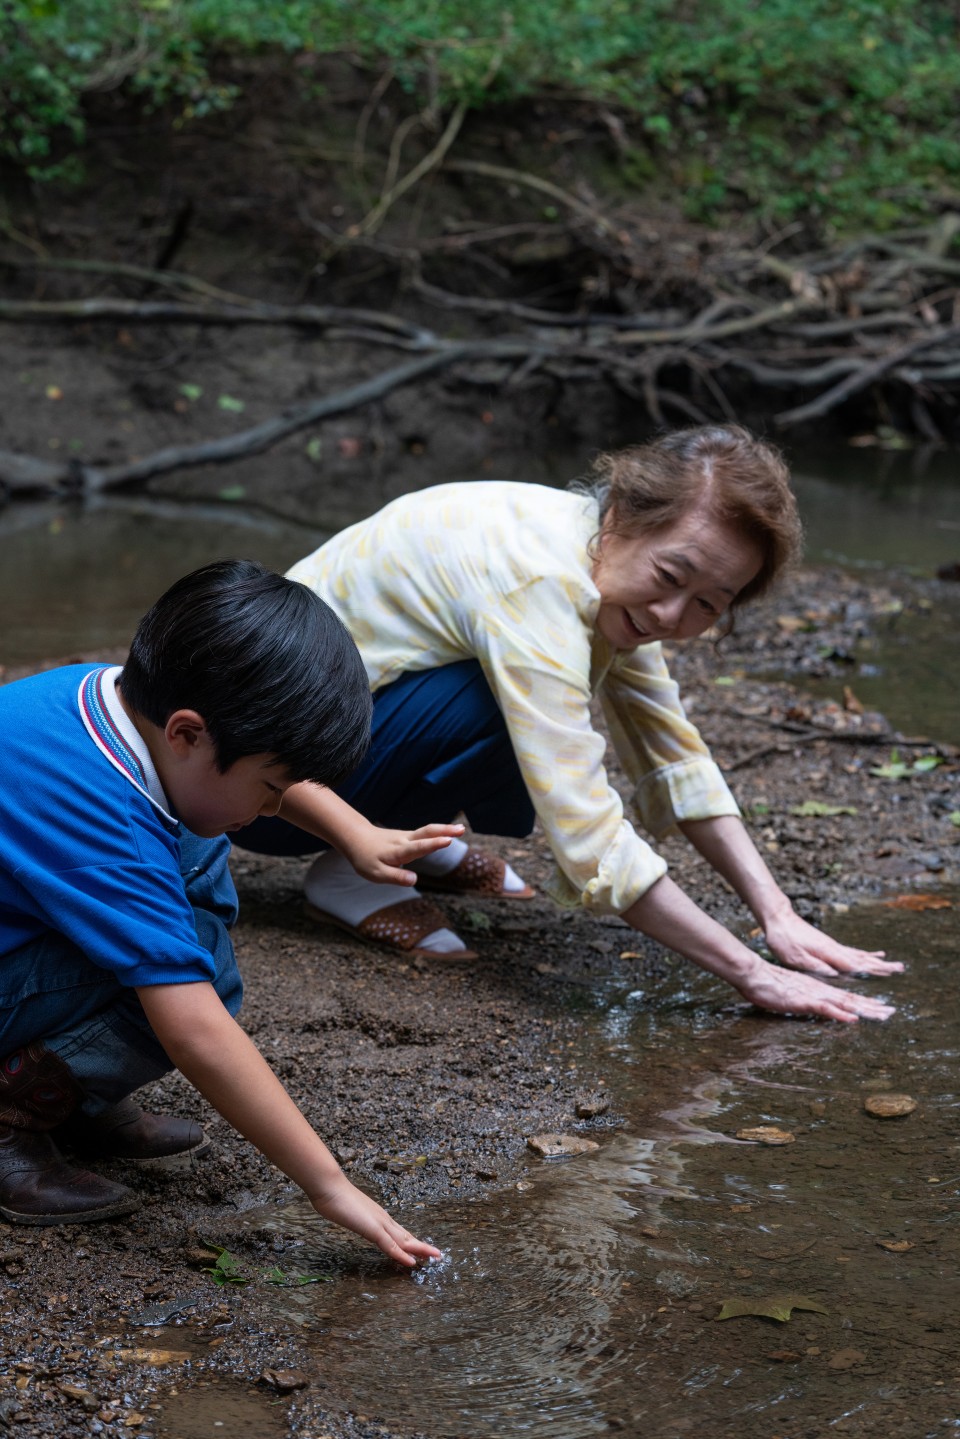 Still from the film "Minari" shows an older Korean woman and a young boy crouching at the bank of a shallow river. They place their hands in the muddy water as the older woman smiles at the child.